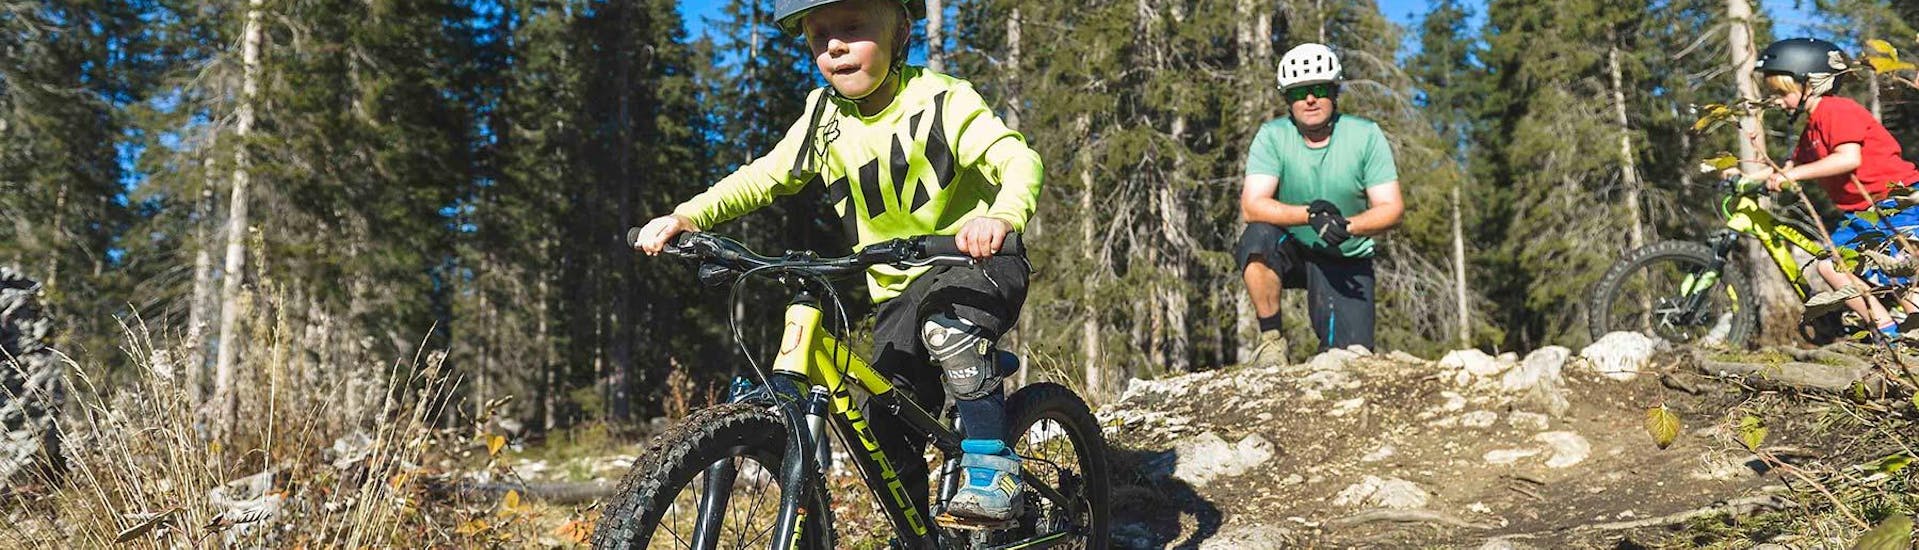 A child riding a bike during the Mountain Bike Hire for Kids in Lenzerheide with Epic Lenzerheide.